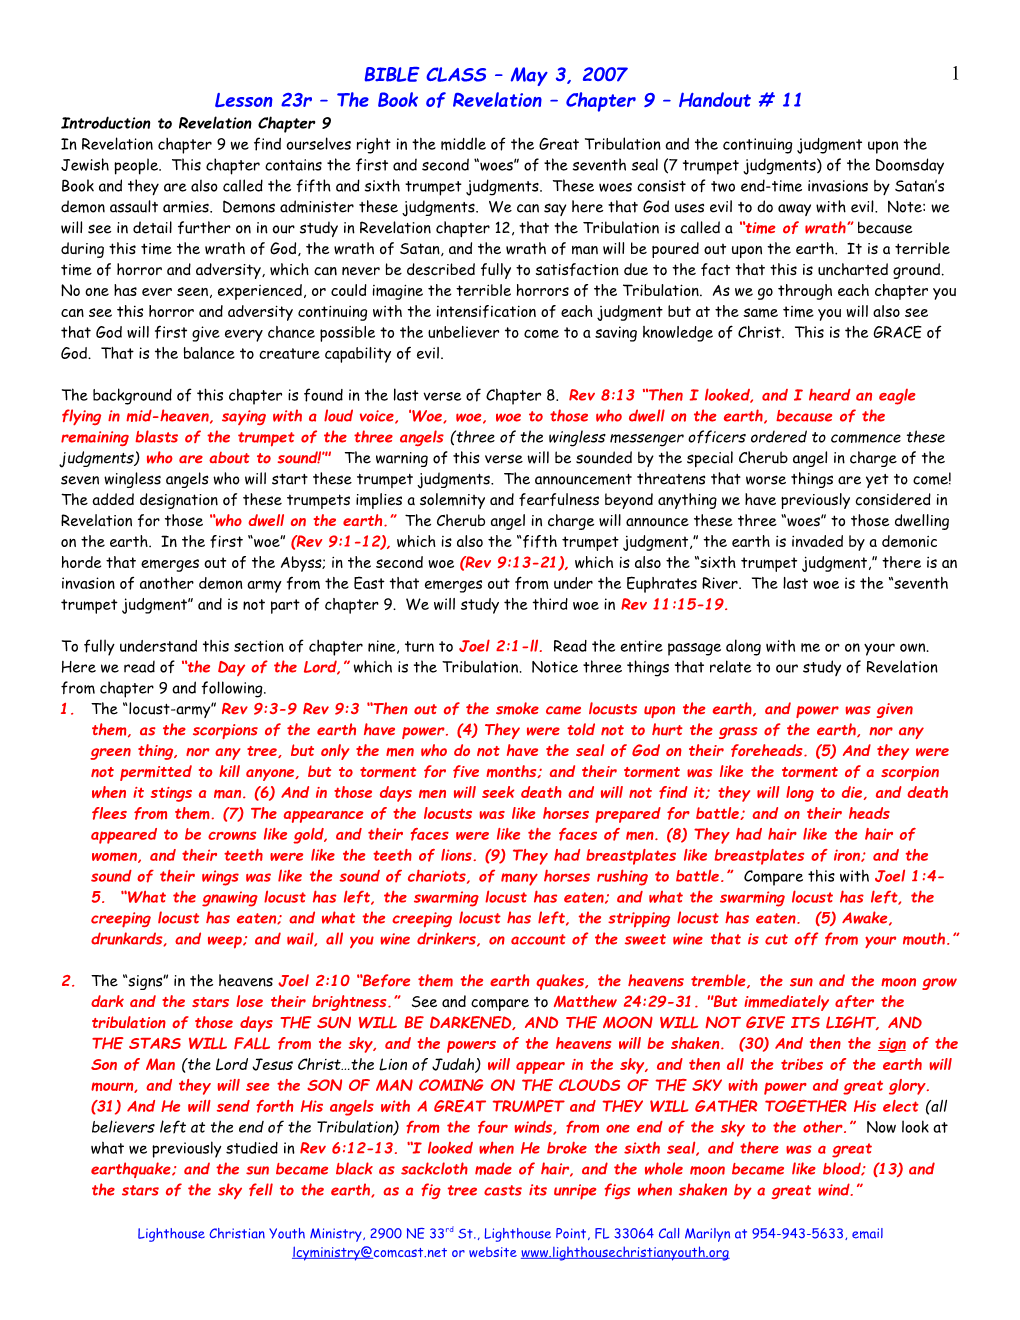 Lesson 23R the Book of Revelation Chapter 9 Handout # 11